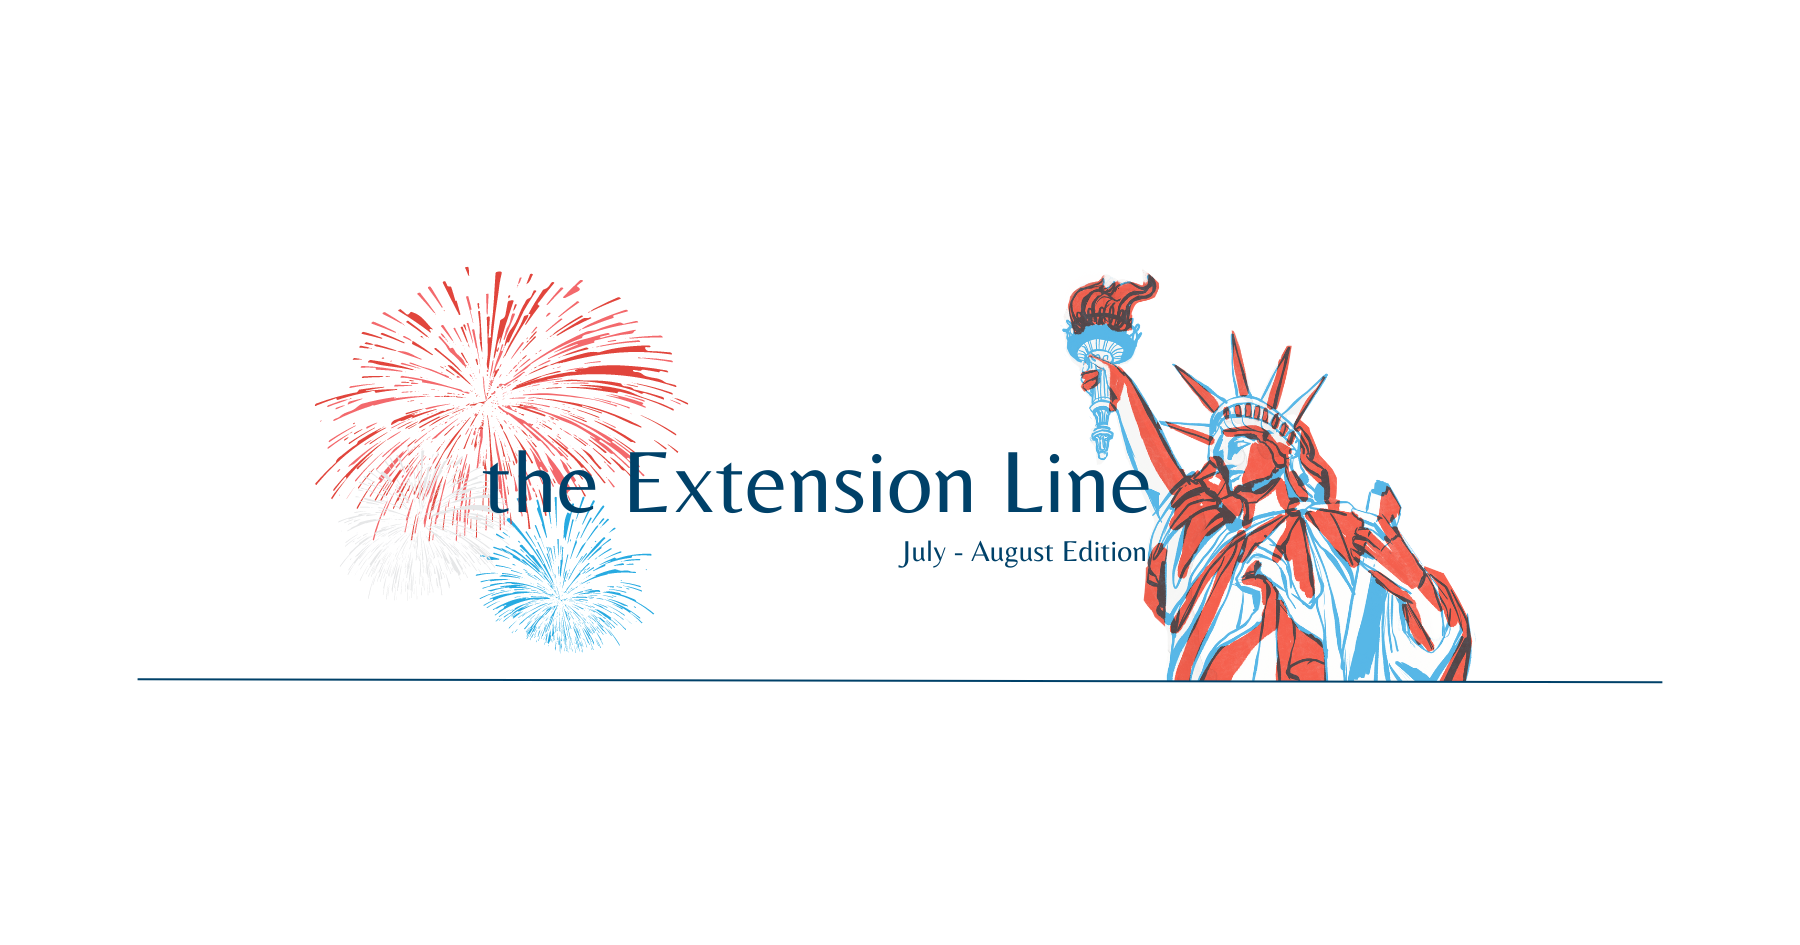 the Extension Line July Edition banner